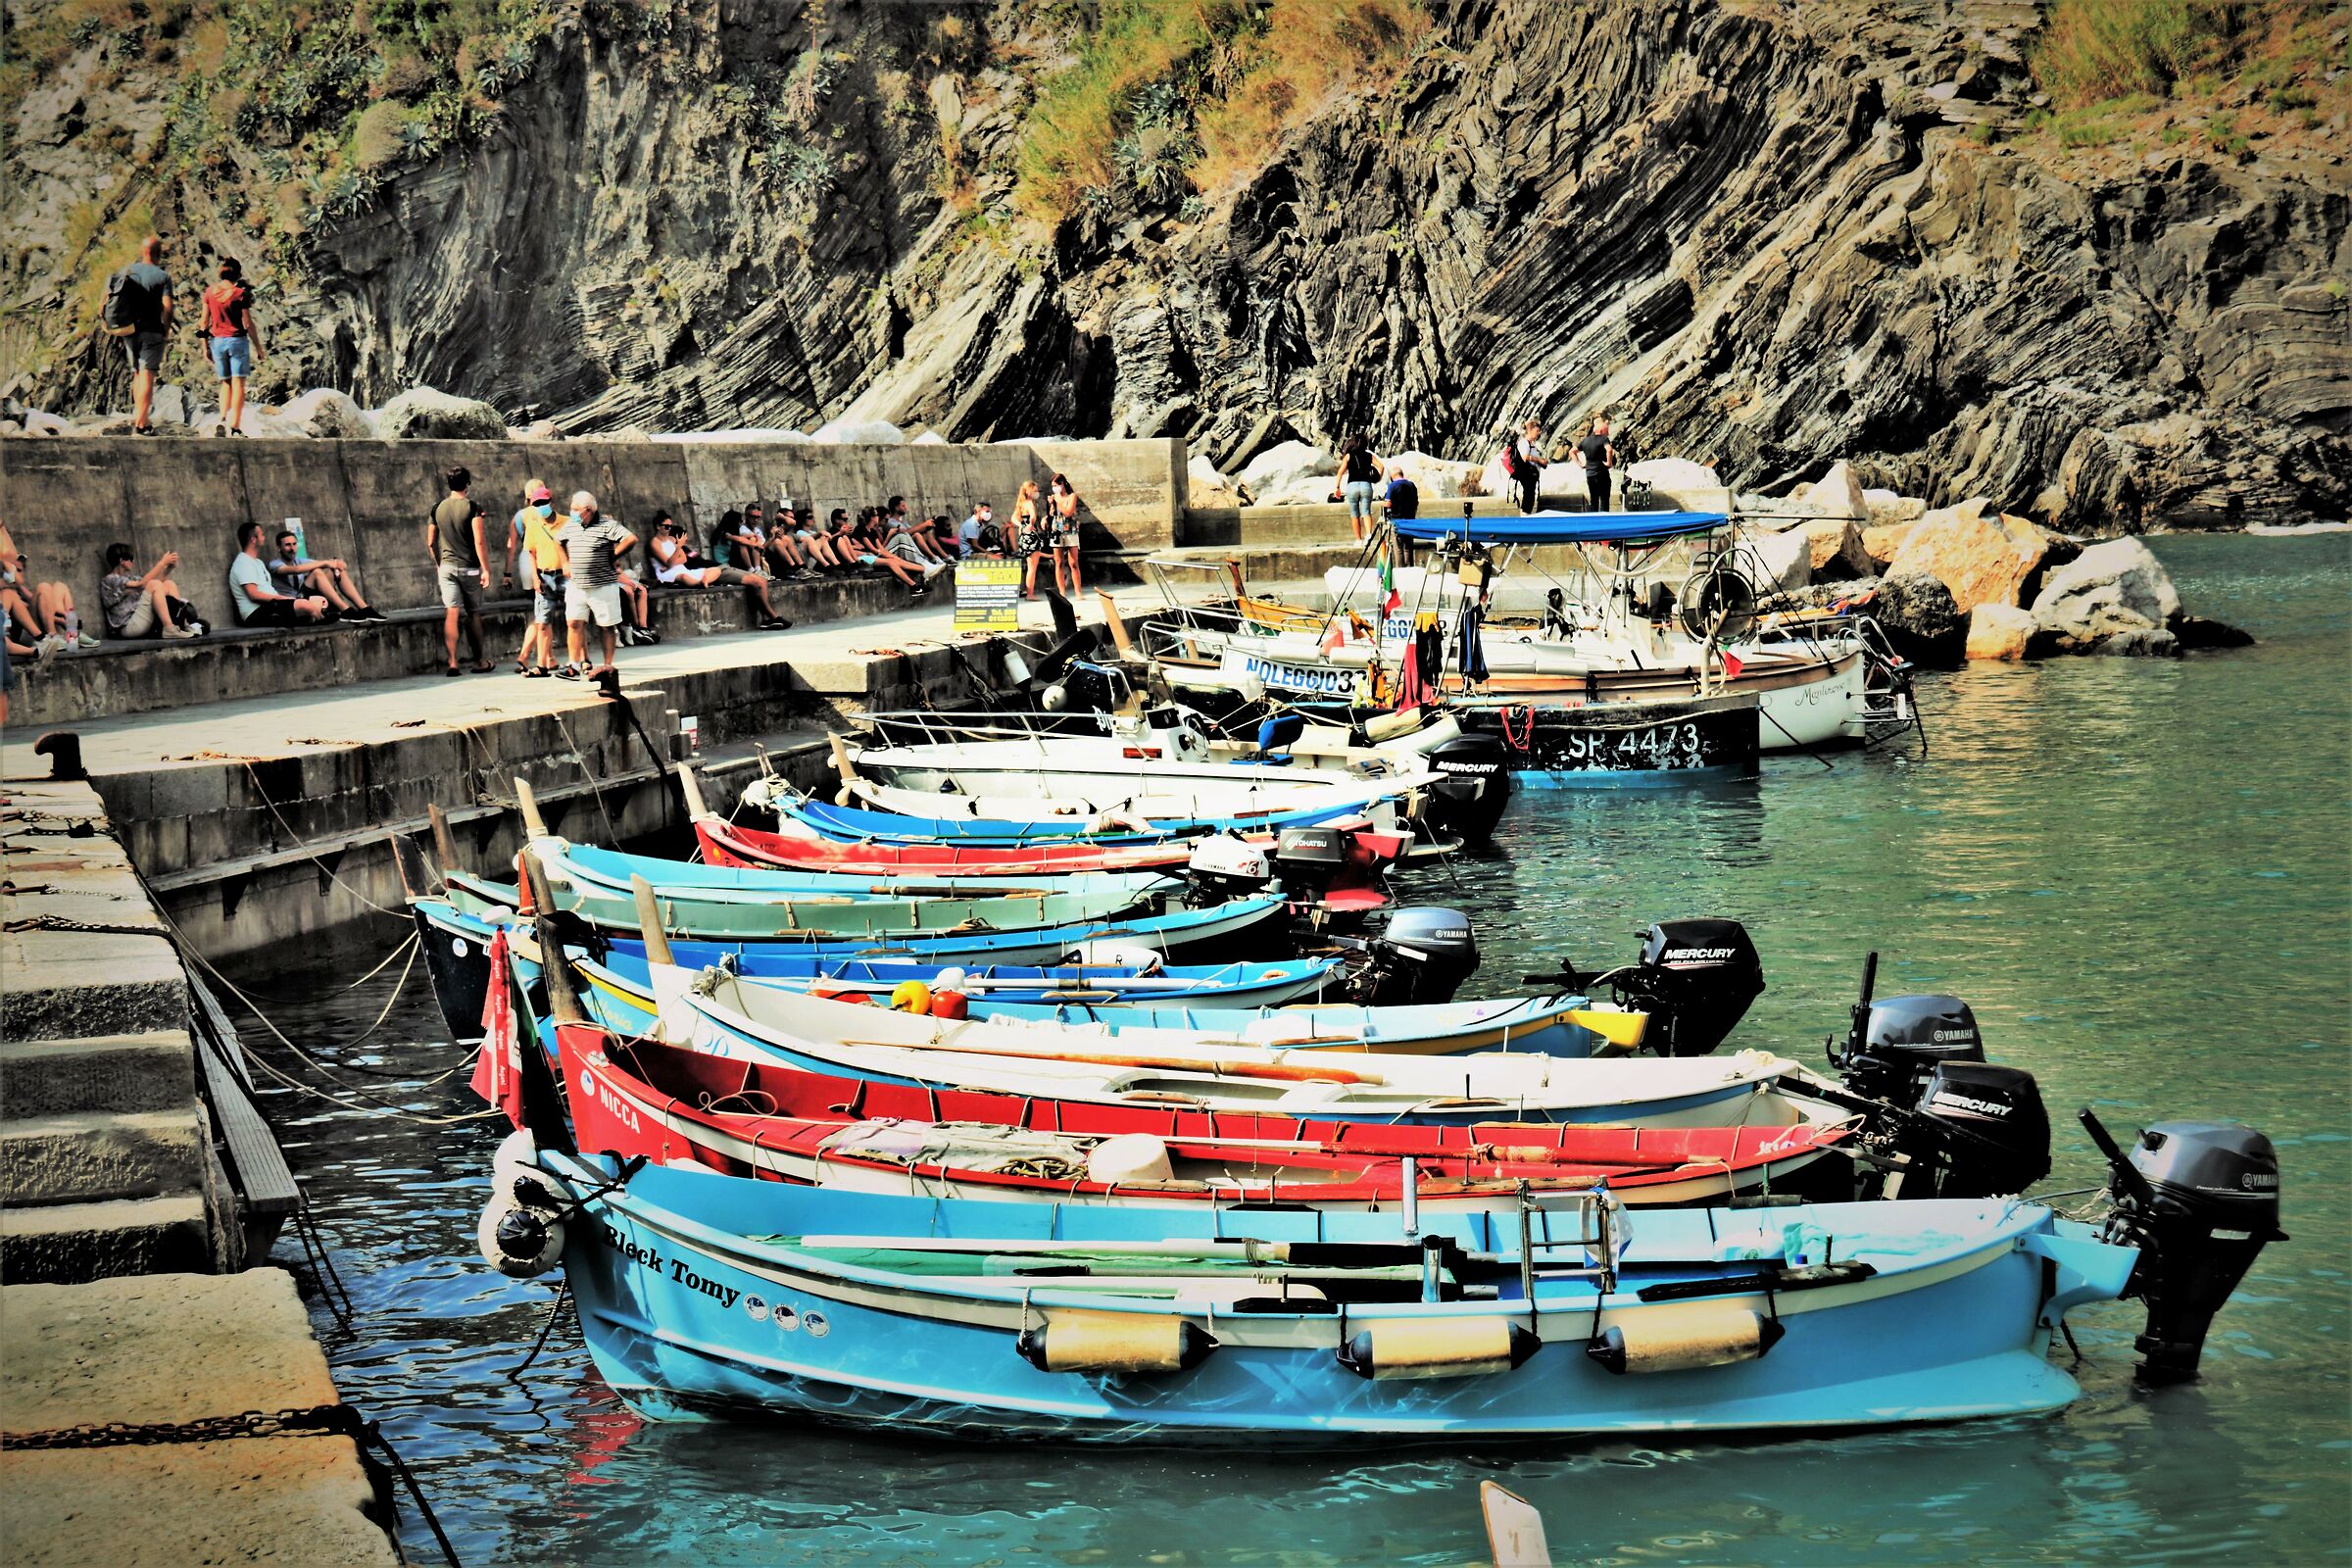 " The privileged in the marina of Vernazza "...